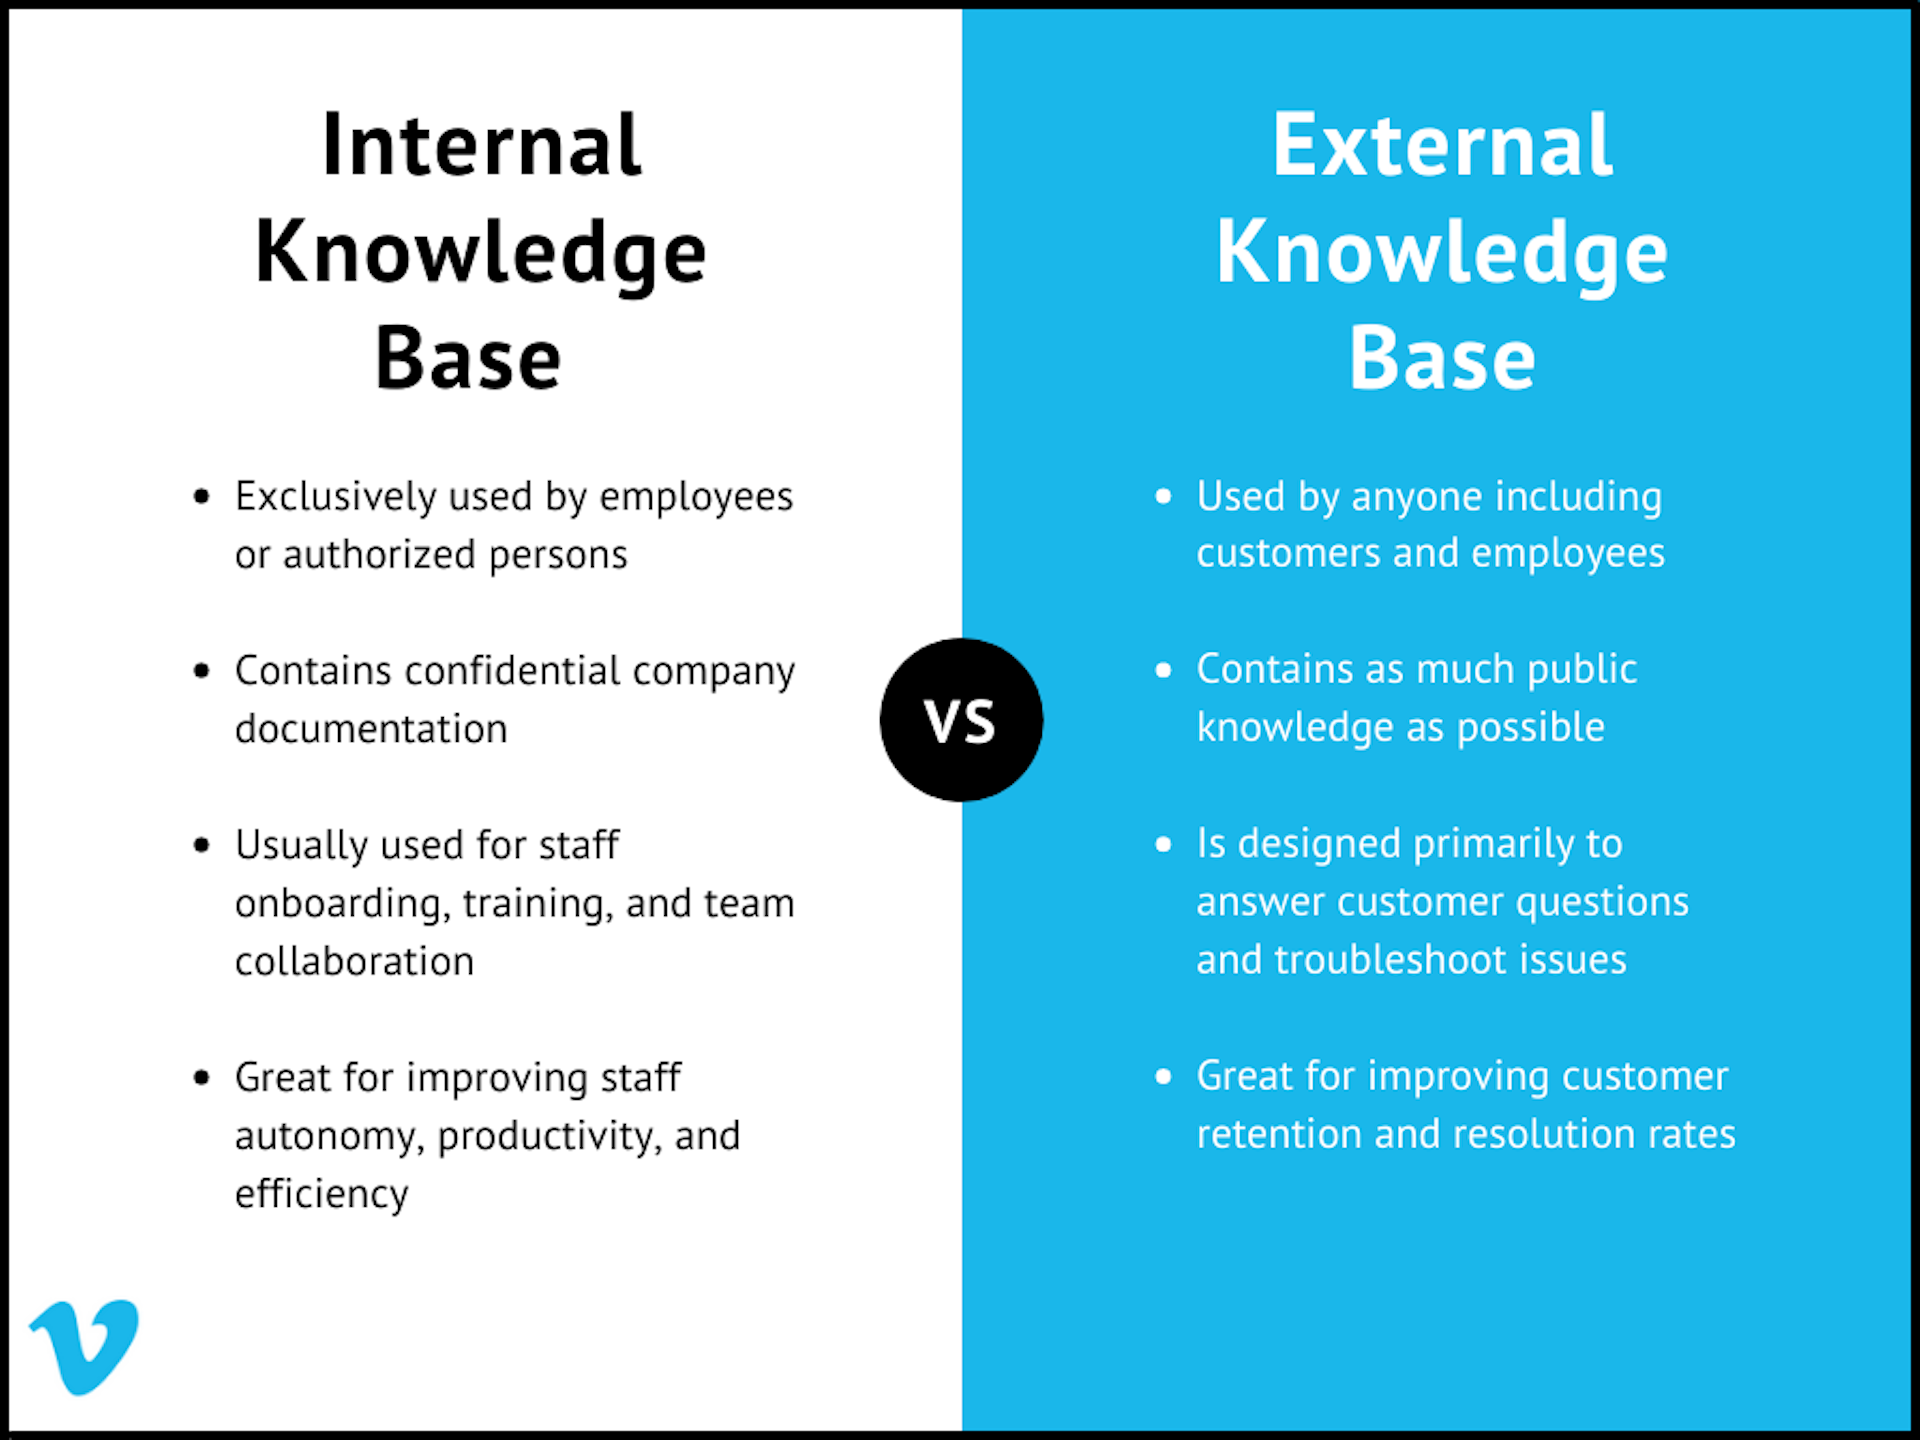 Simple infographic with plain background reads:

Internal knowledge base

Exclusively used by employees or authorized persons

Contains confidential company documentation

Usually used for staff onboarding, training, and team collaboration

Great for improving staff autonomy, productivity, and efficiency 

External knowledge base:

Used by anyone including customers and employees 

Contains as much public knowledge as possible 

Is designed primarily to answer customer questions and troubleshoot issues

Great for improving customer retention and resolution rates 